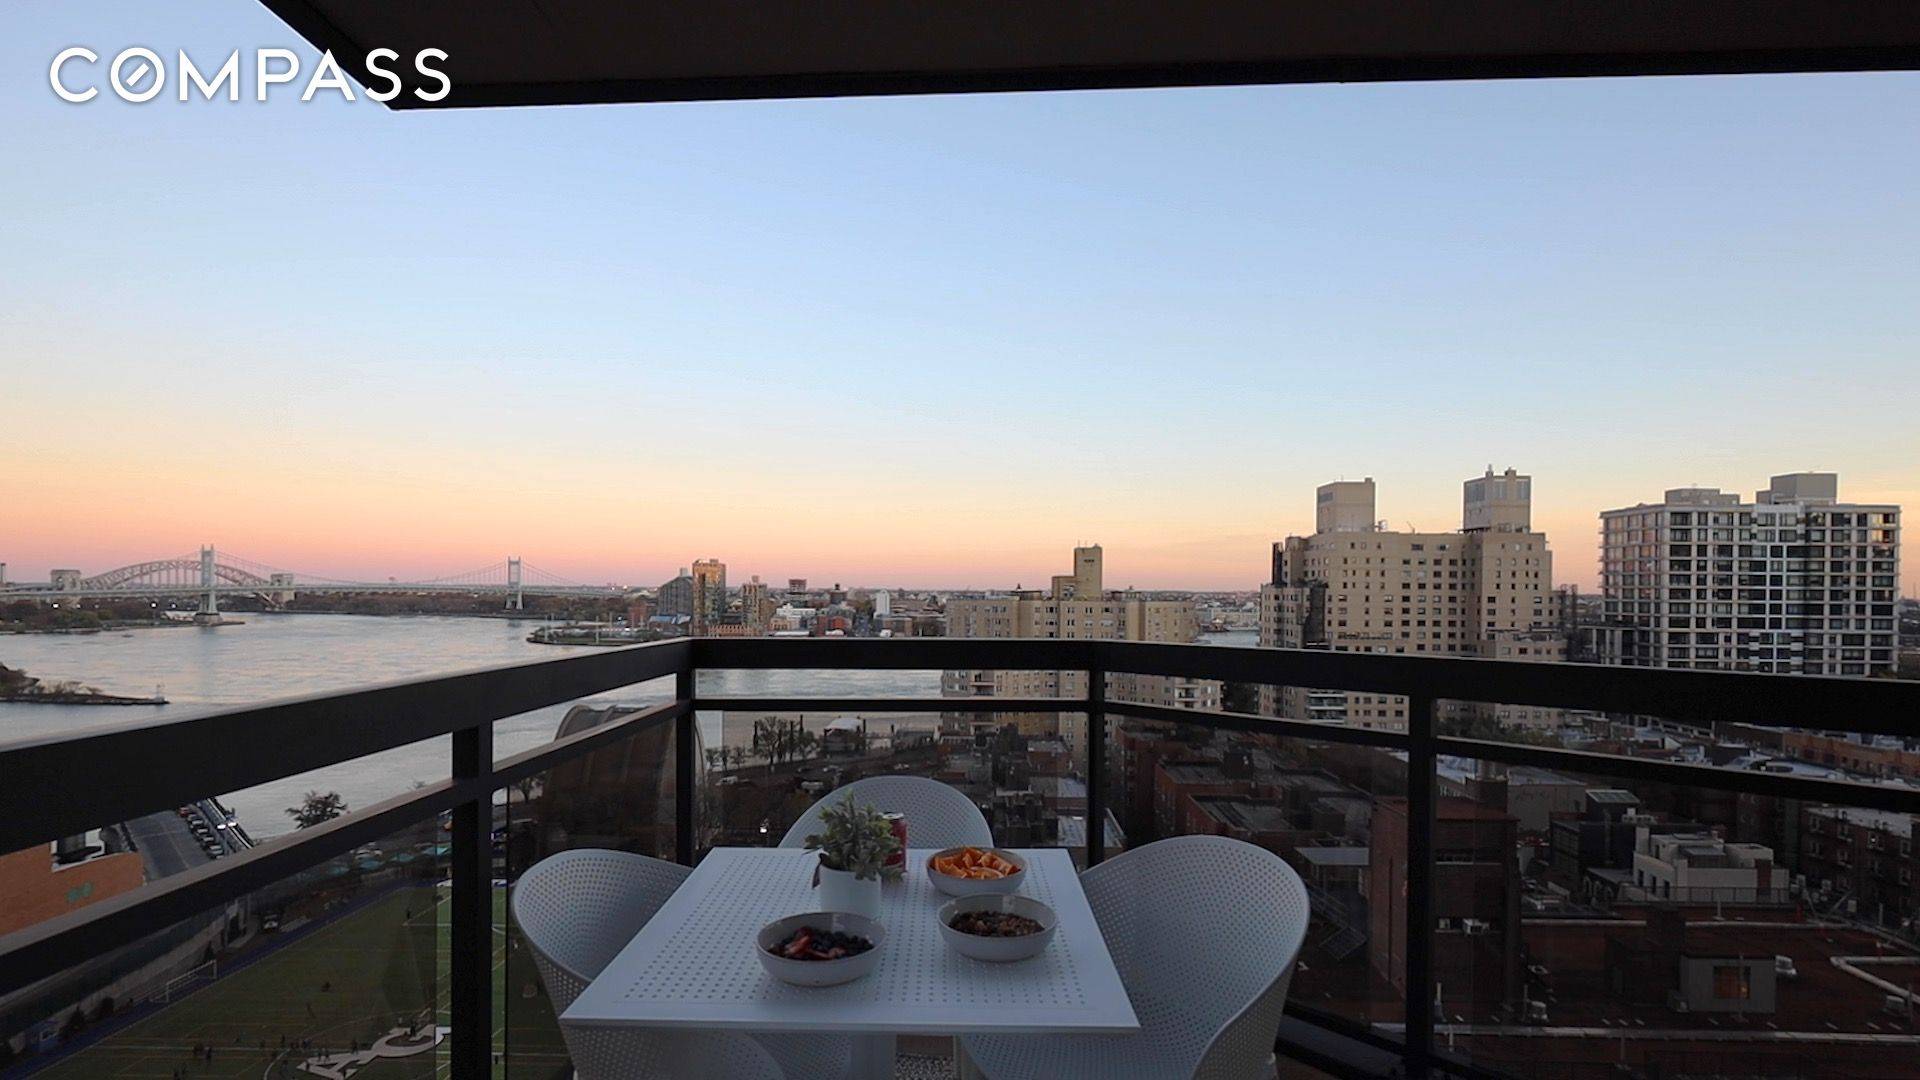 Welcome to this expansive apartment which boasts 7 bedrooms, 5 full bathrooms, 2 powder rooms, and 3 large balconies.